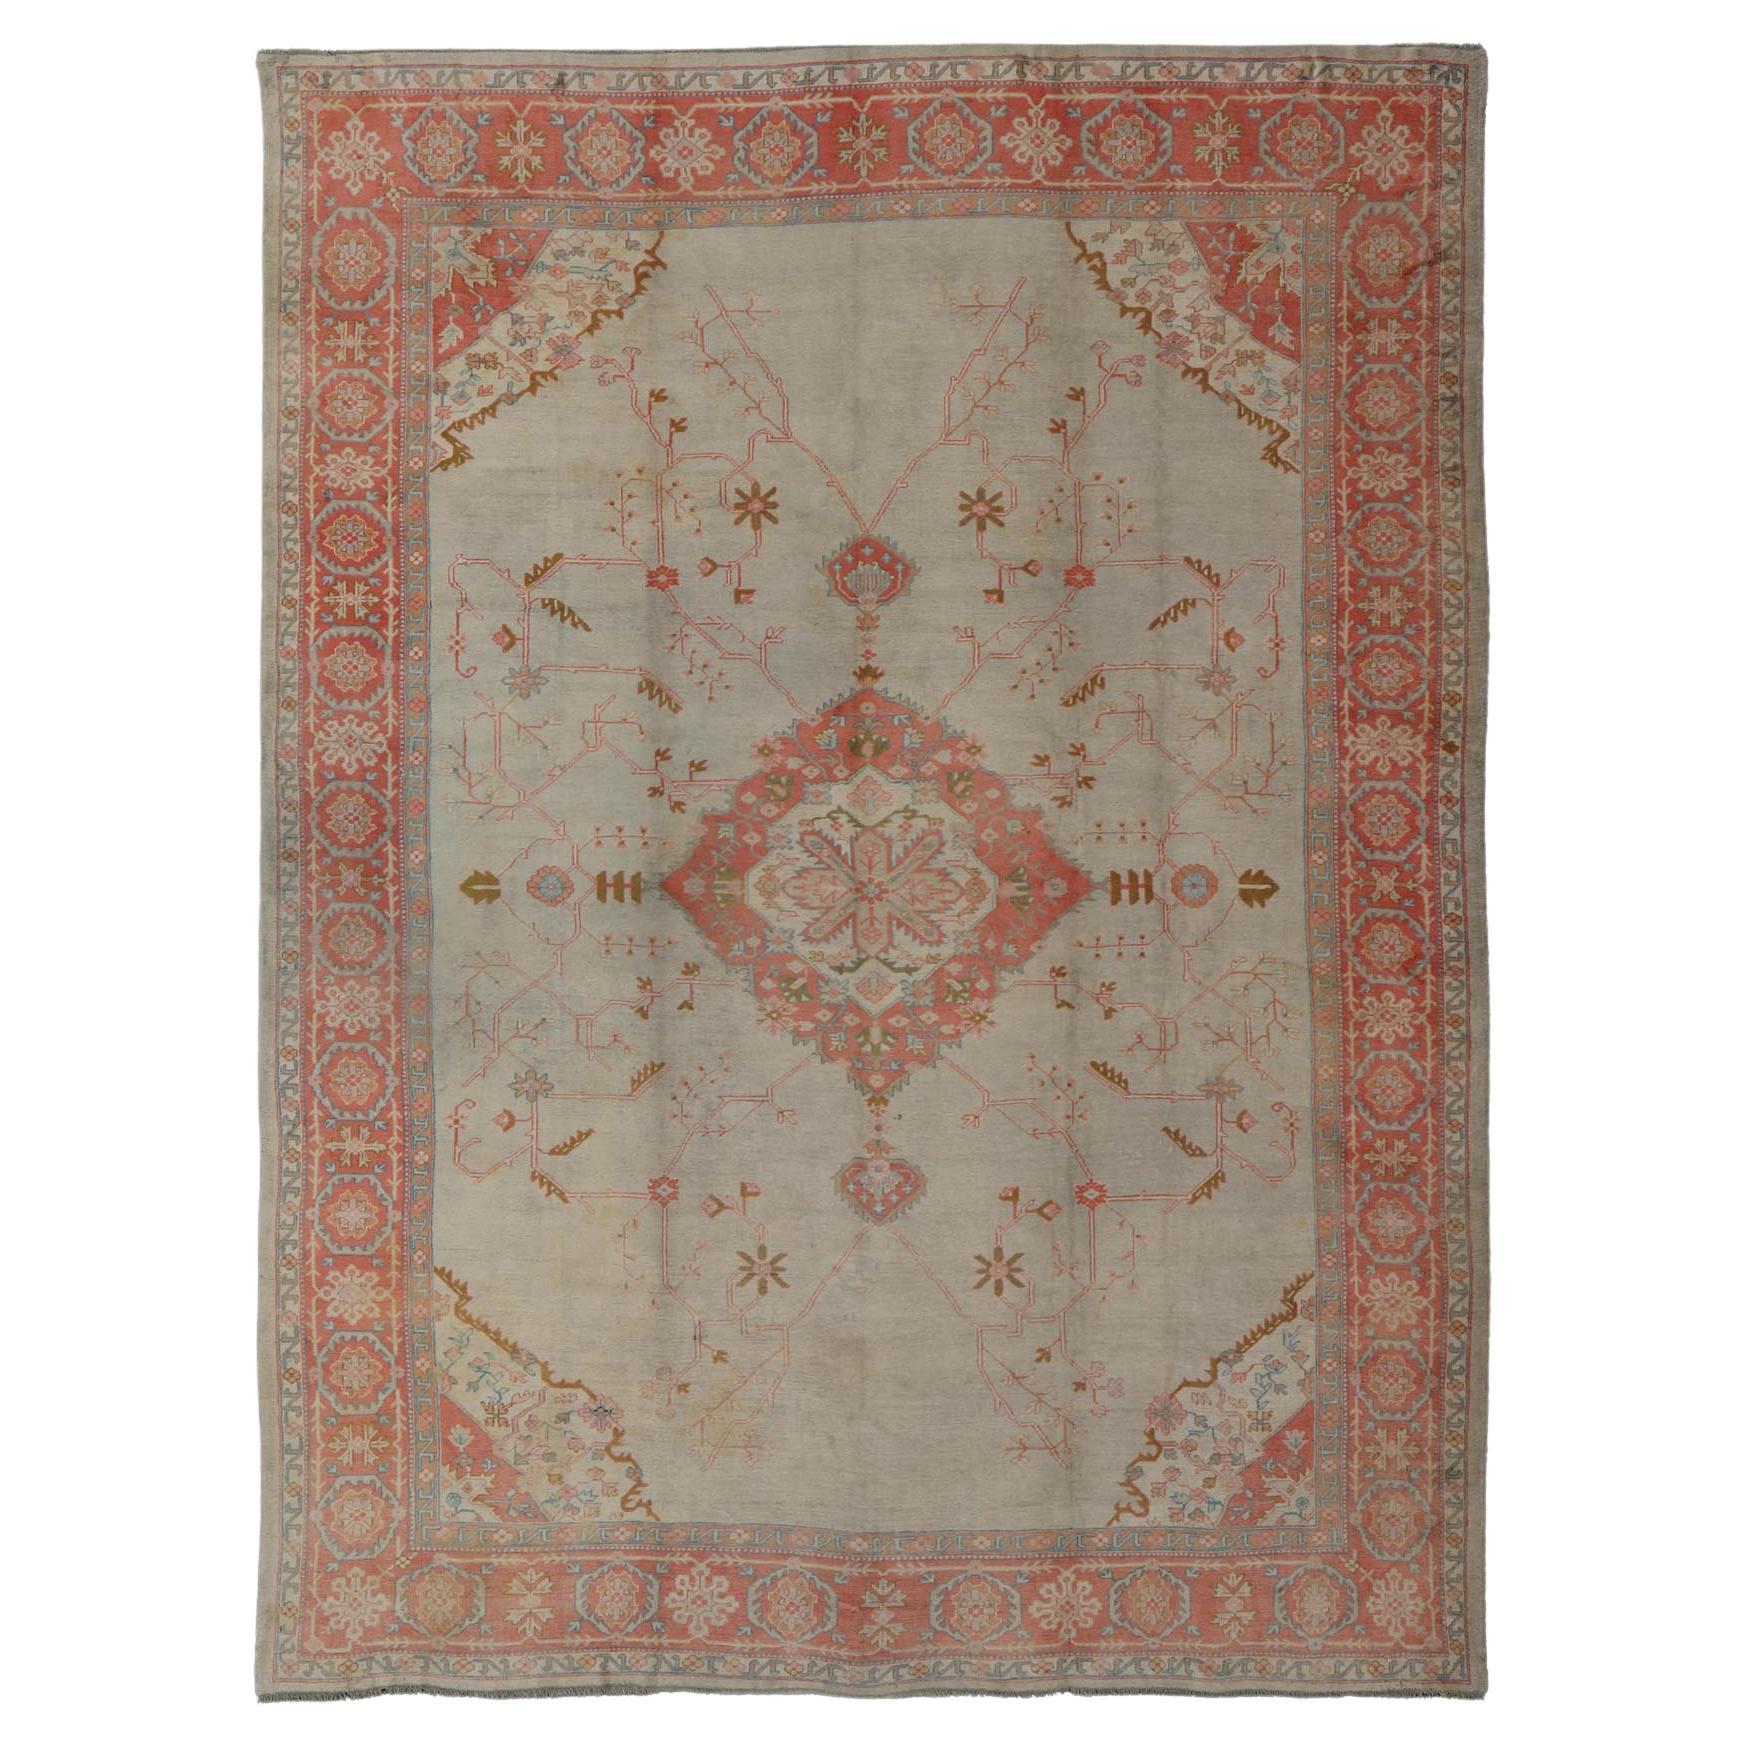 Large Antique Oushak Rug in Taupe / Light Green Background and Coral Border For Sale